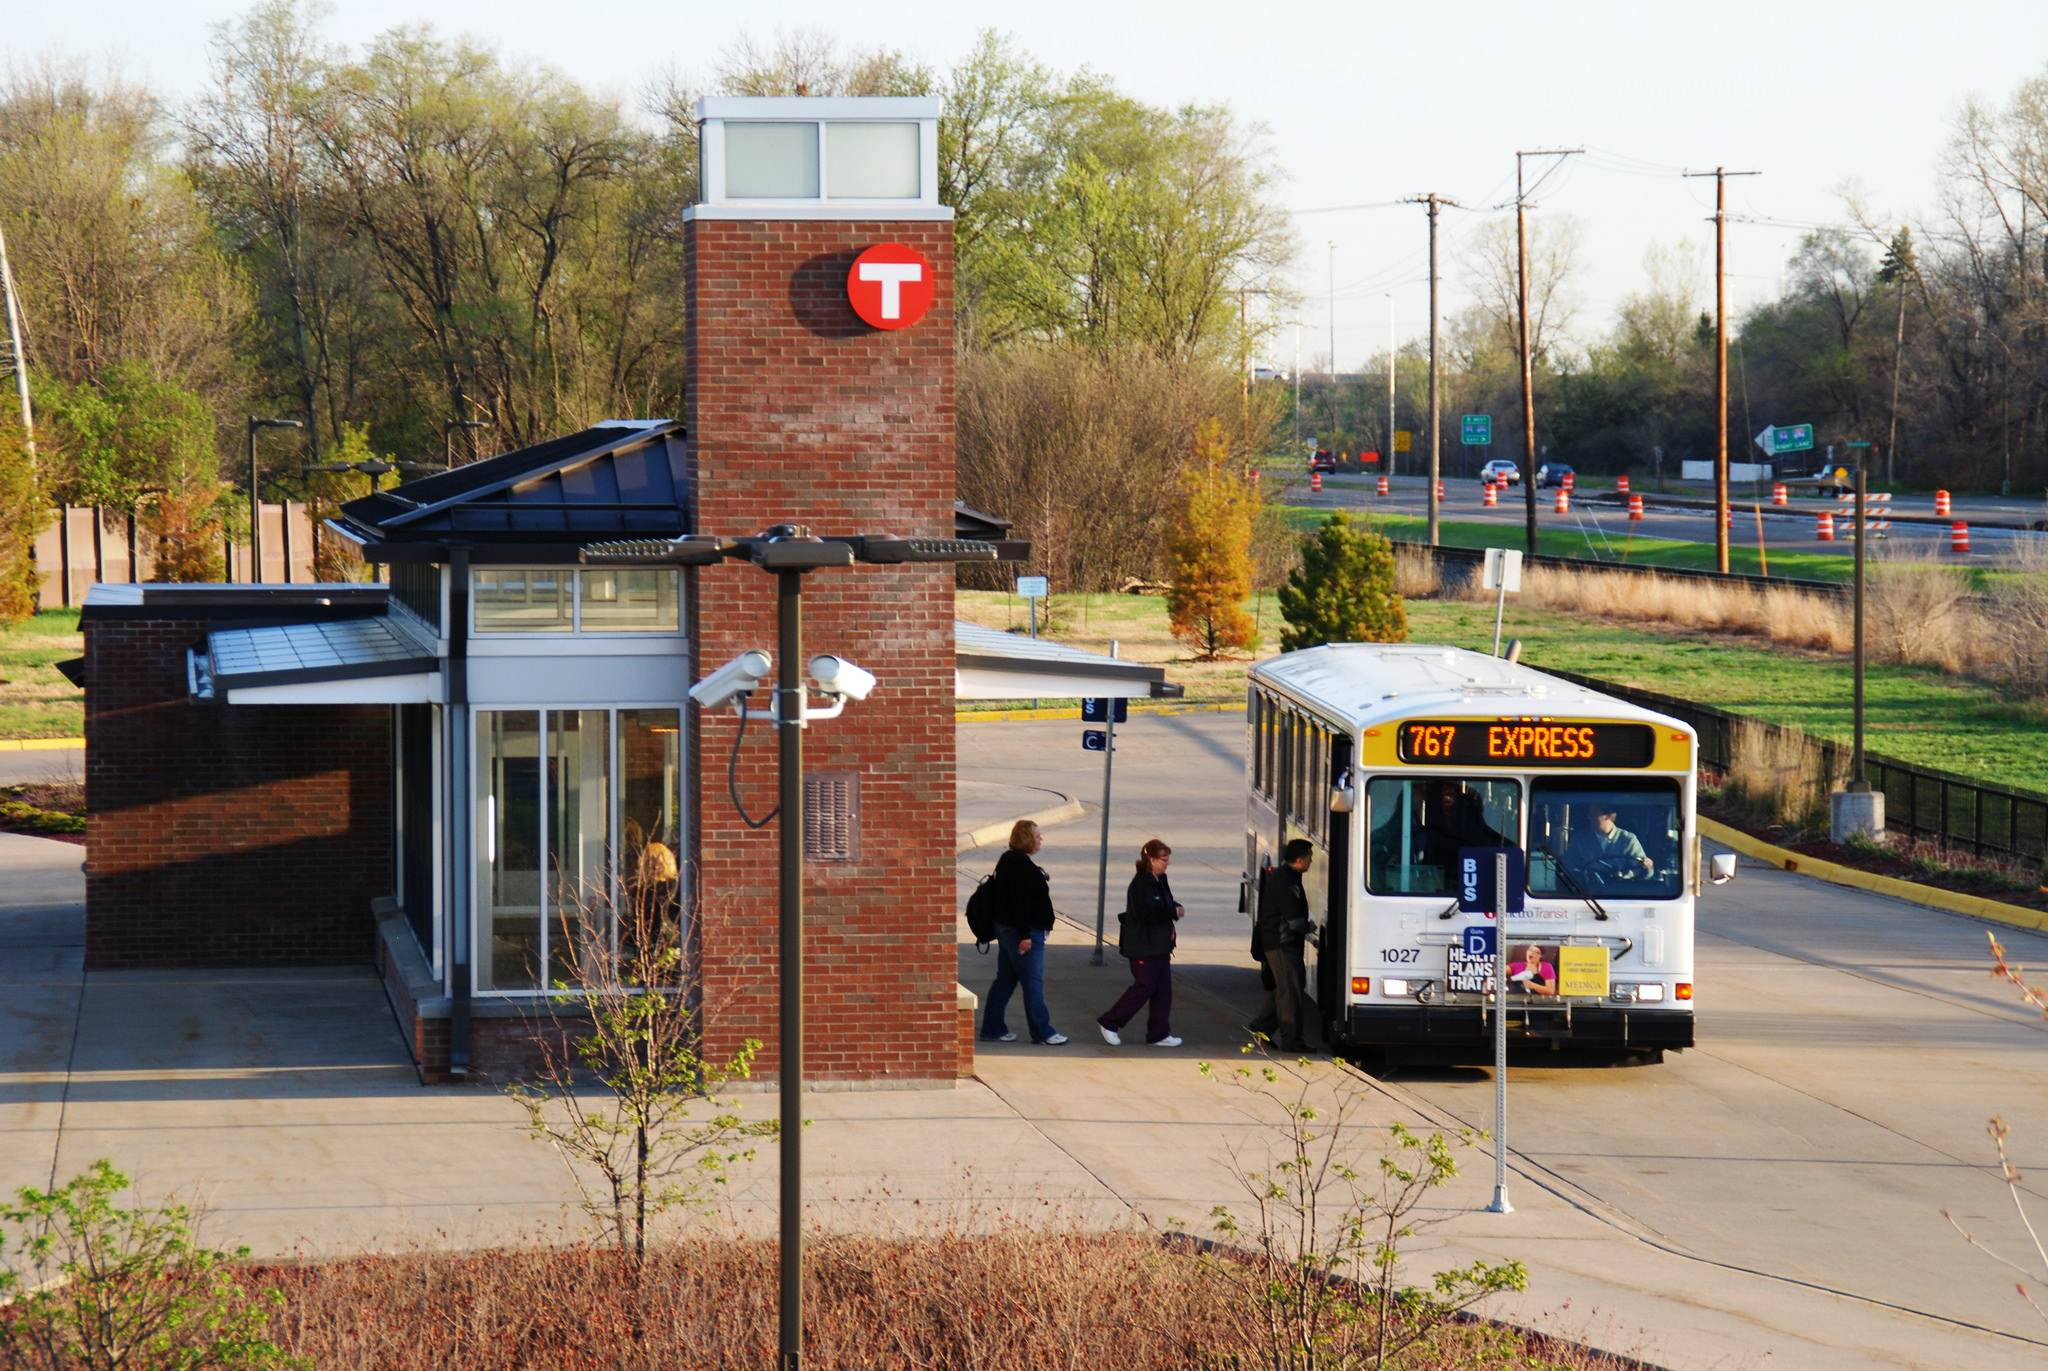 Customers board Route 767 at the Bottineau Blvd & 63rd Avenue Park & Ride.